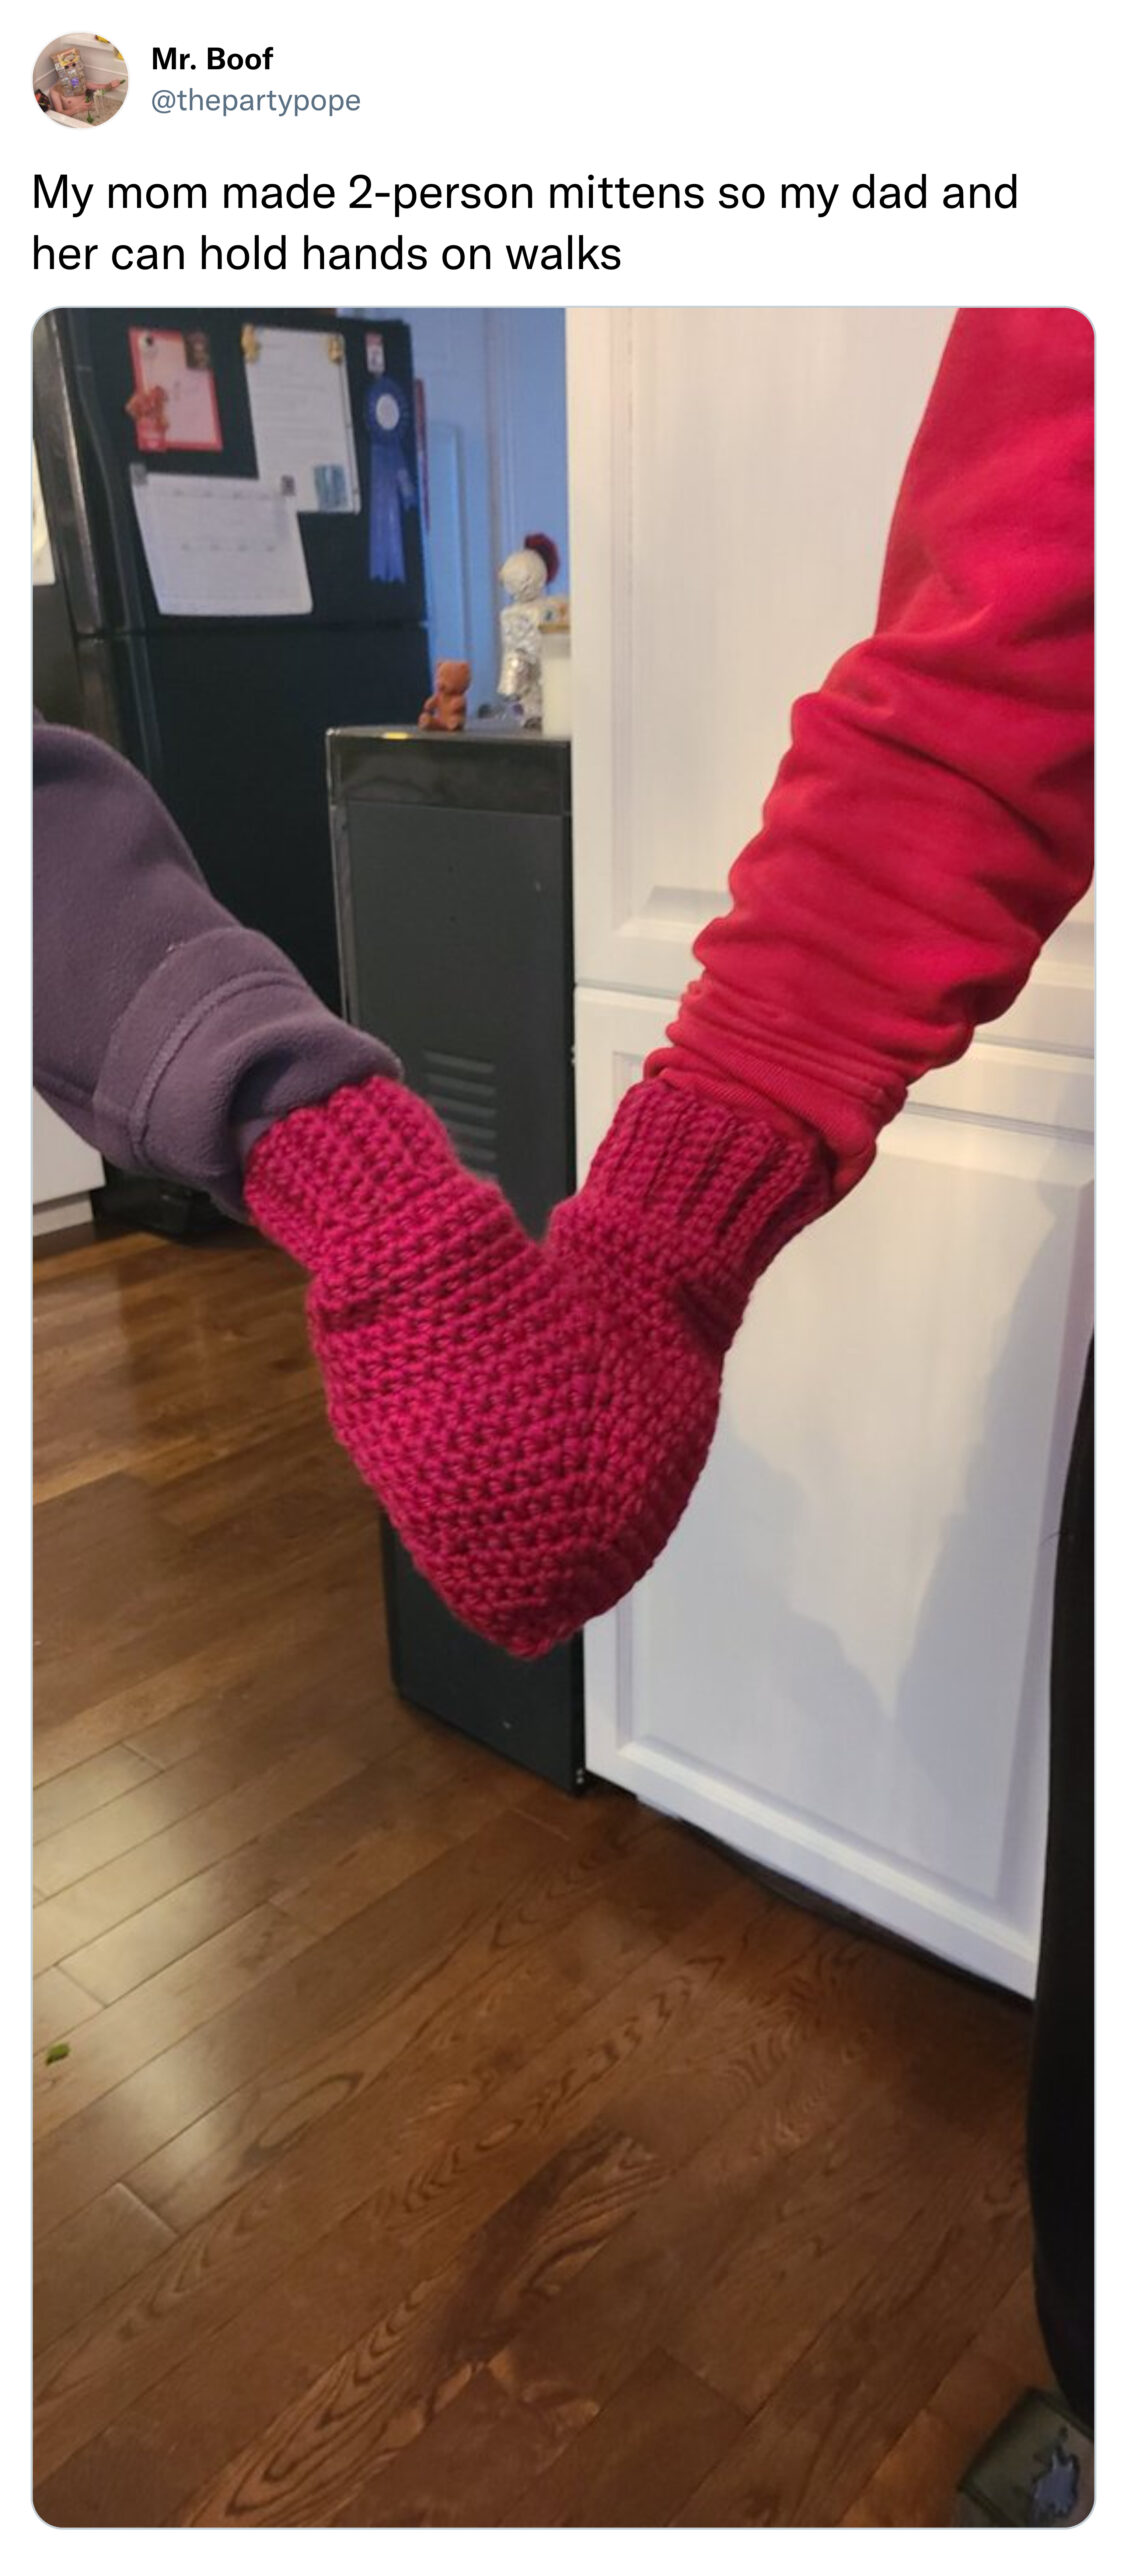 tweets of the week - floor - Mr. Boof My mom made 2person mittens so my dad and her can hold hands on walks C.